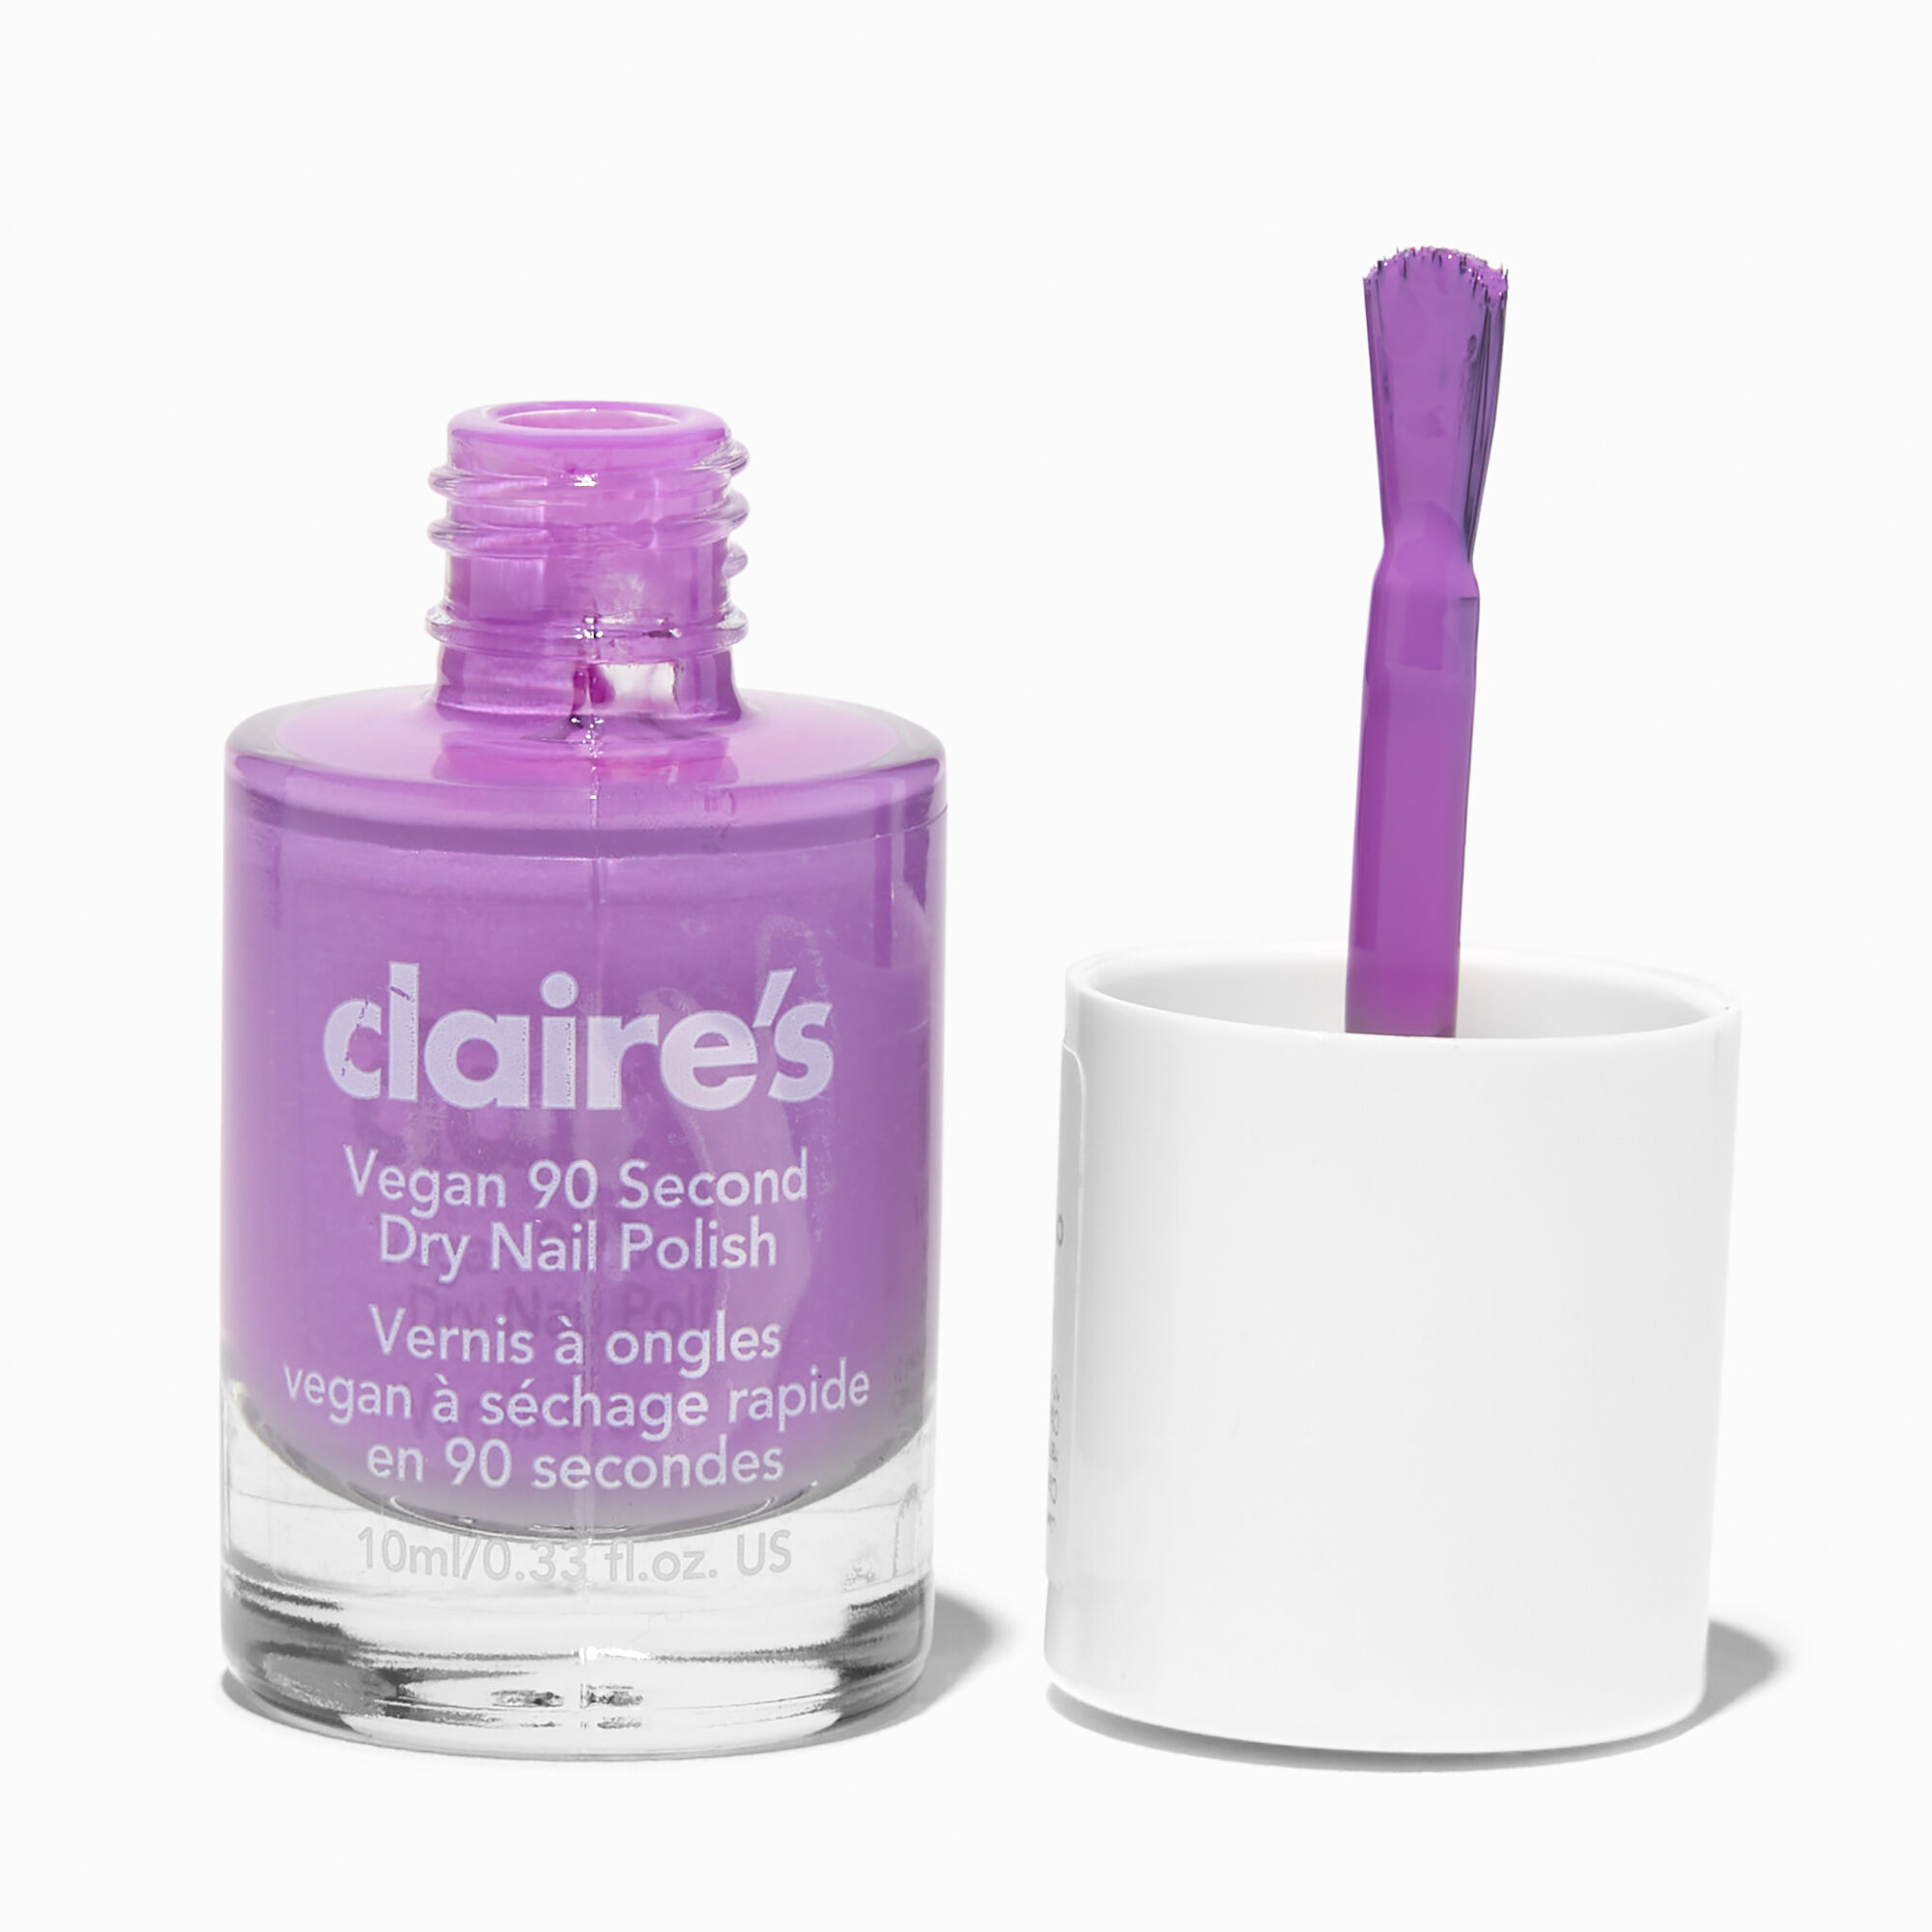 View Claires Vegan 90 Second Dry Nail Polish Pixie Wings information